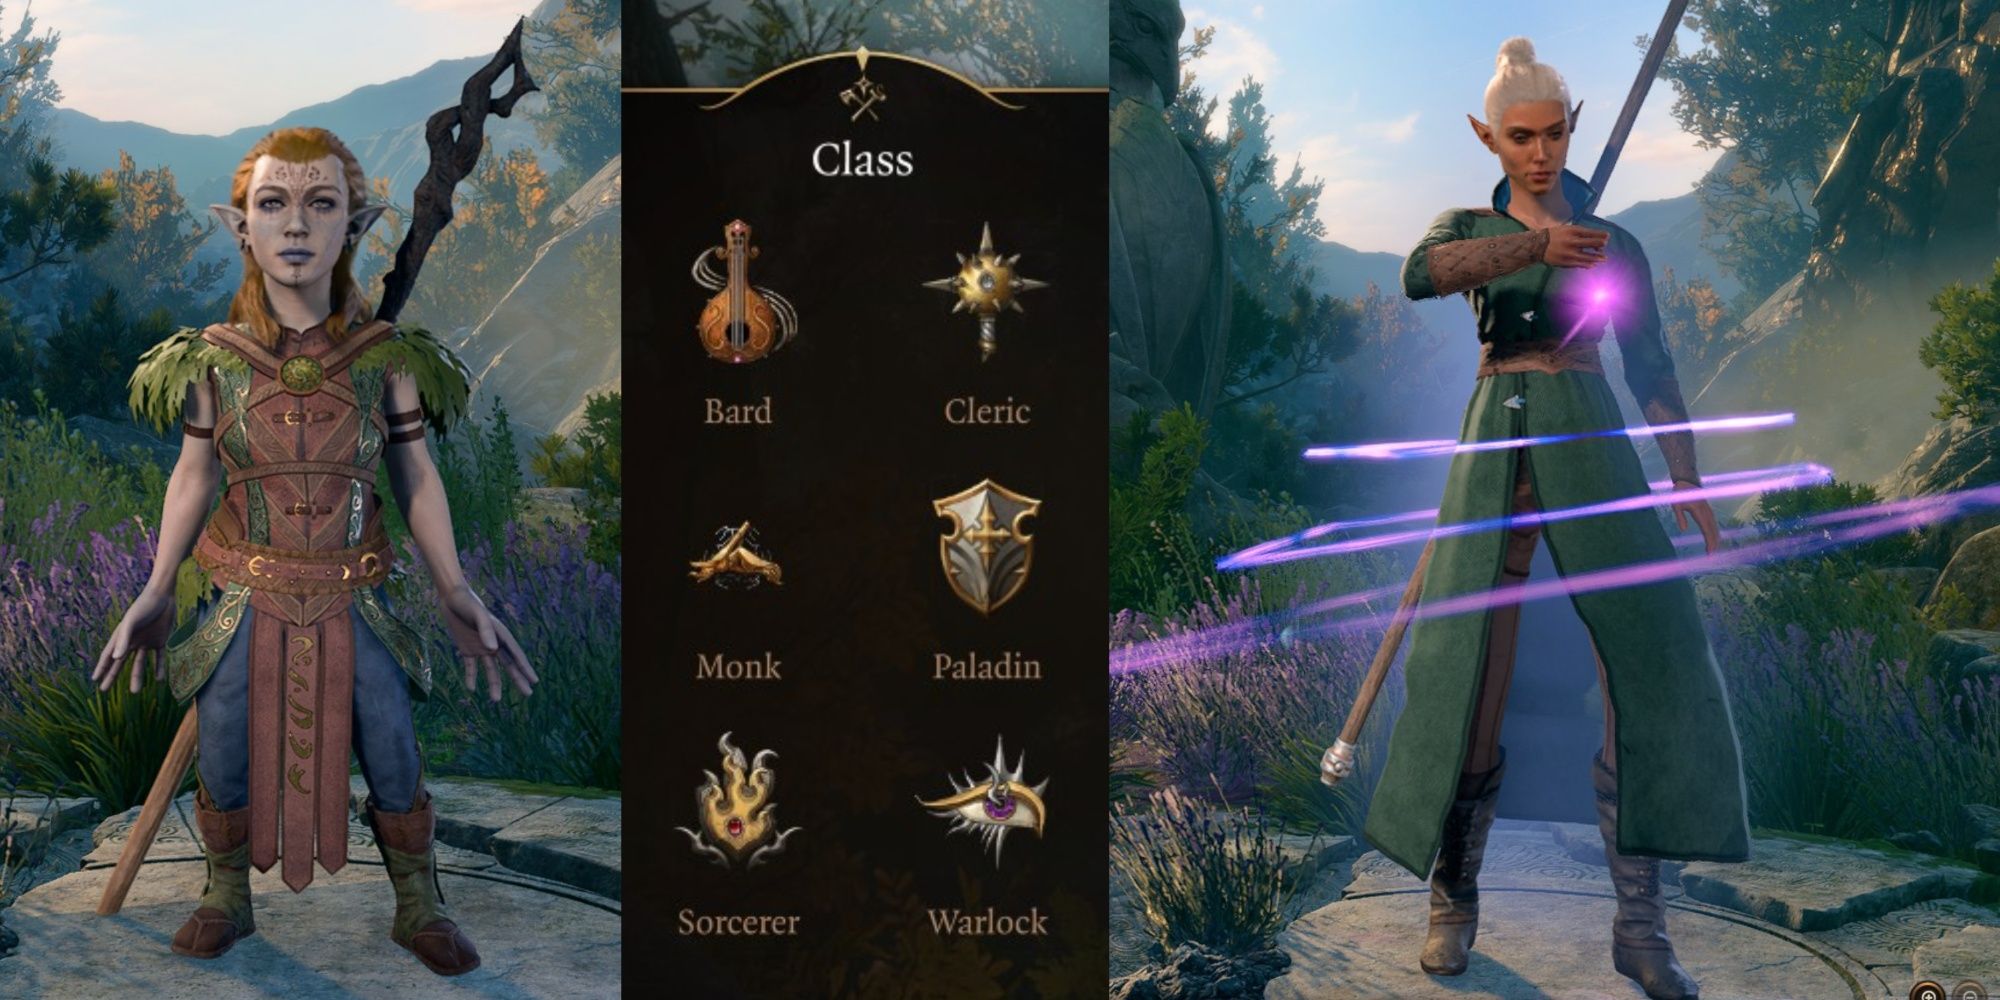 Character Creation Guide: How to Customize Characters